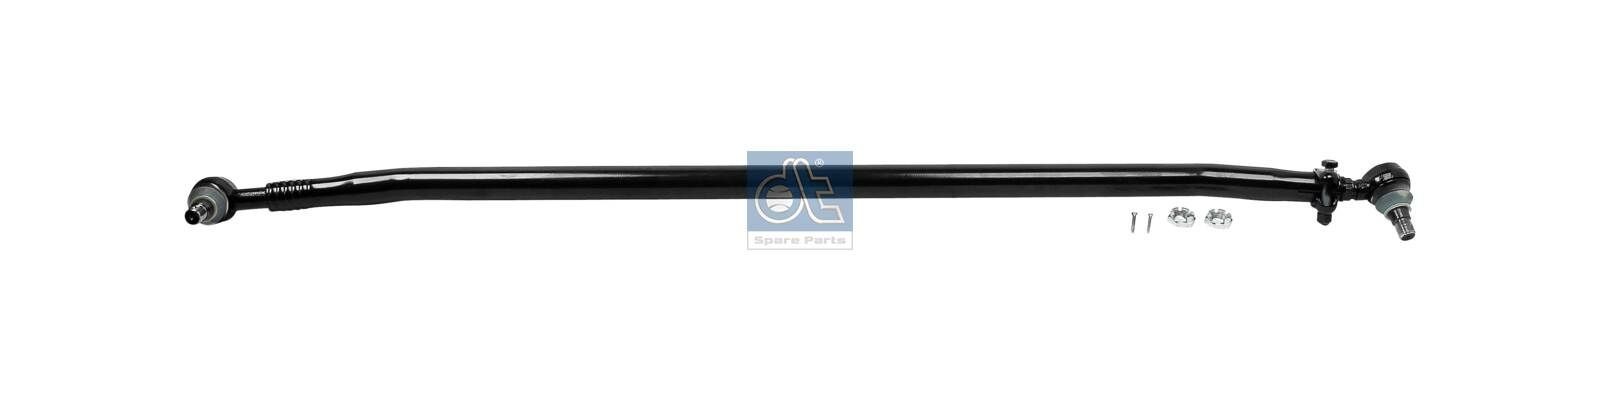 DT Spare Parts 5.22016 Rod Assembly 1 706 037